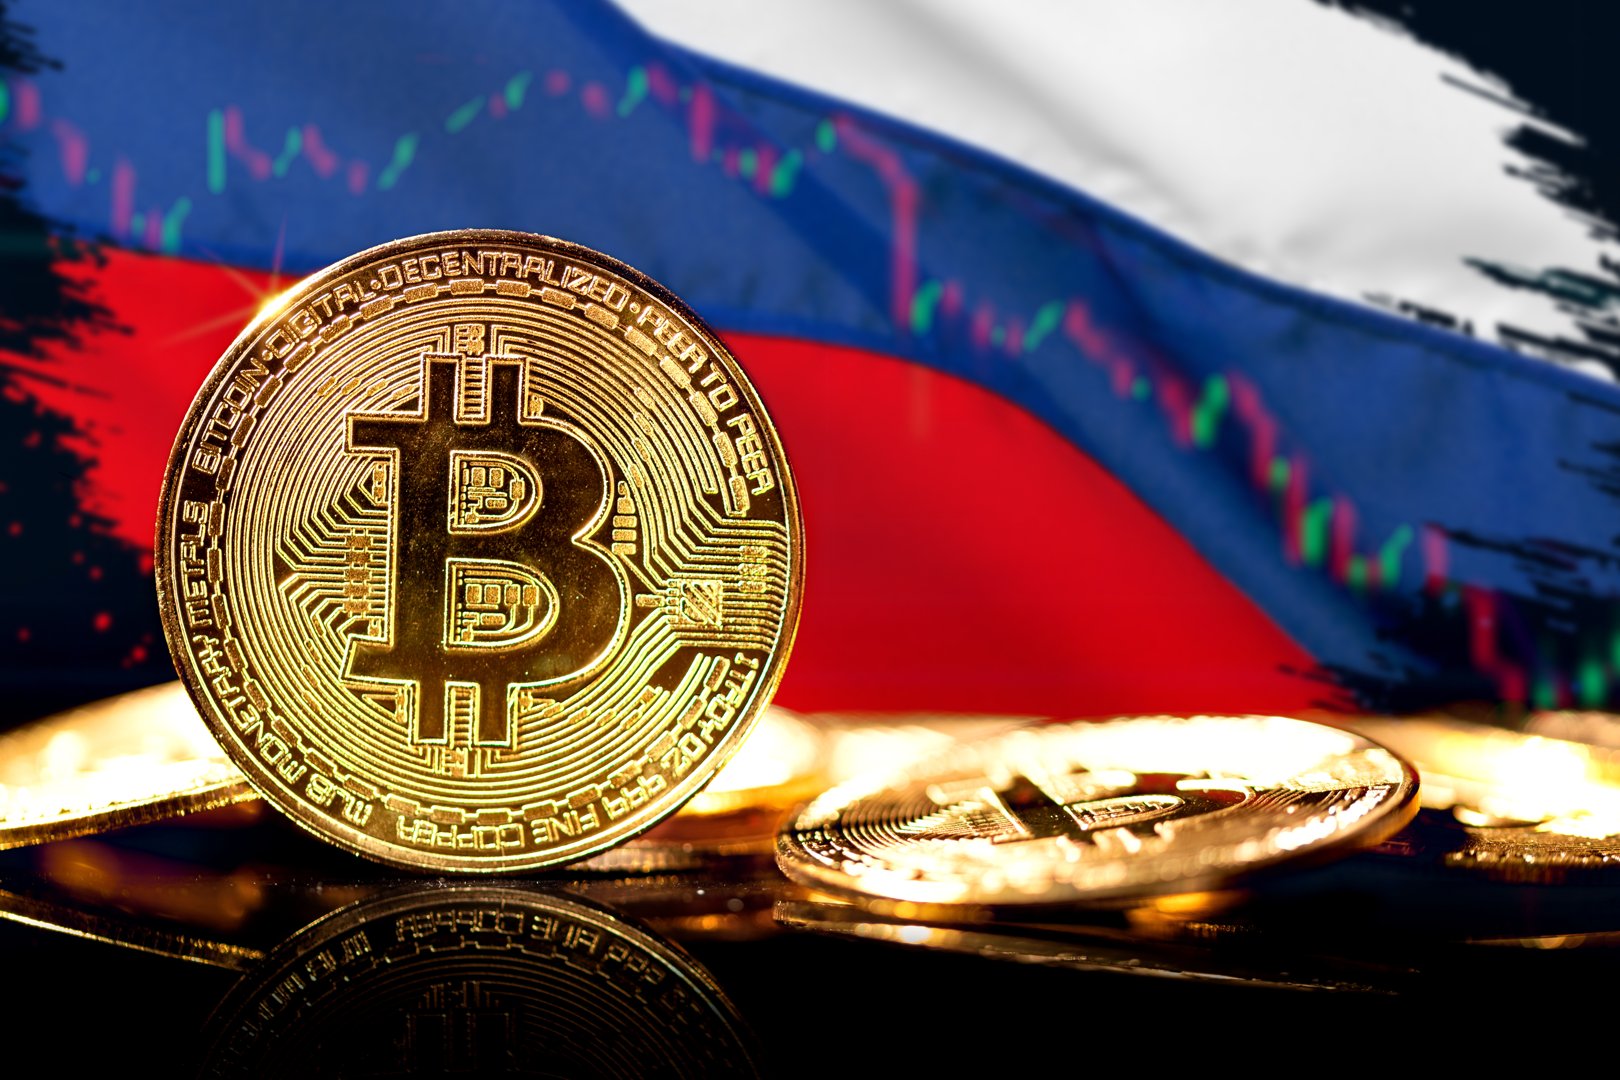 Artist's renderings of a Bitcoin token, against a background of the Russian flag and a line graph.